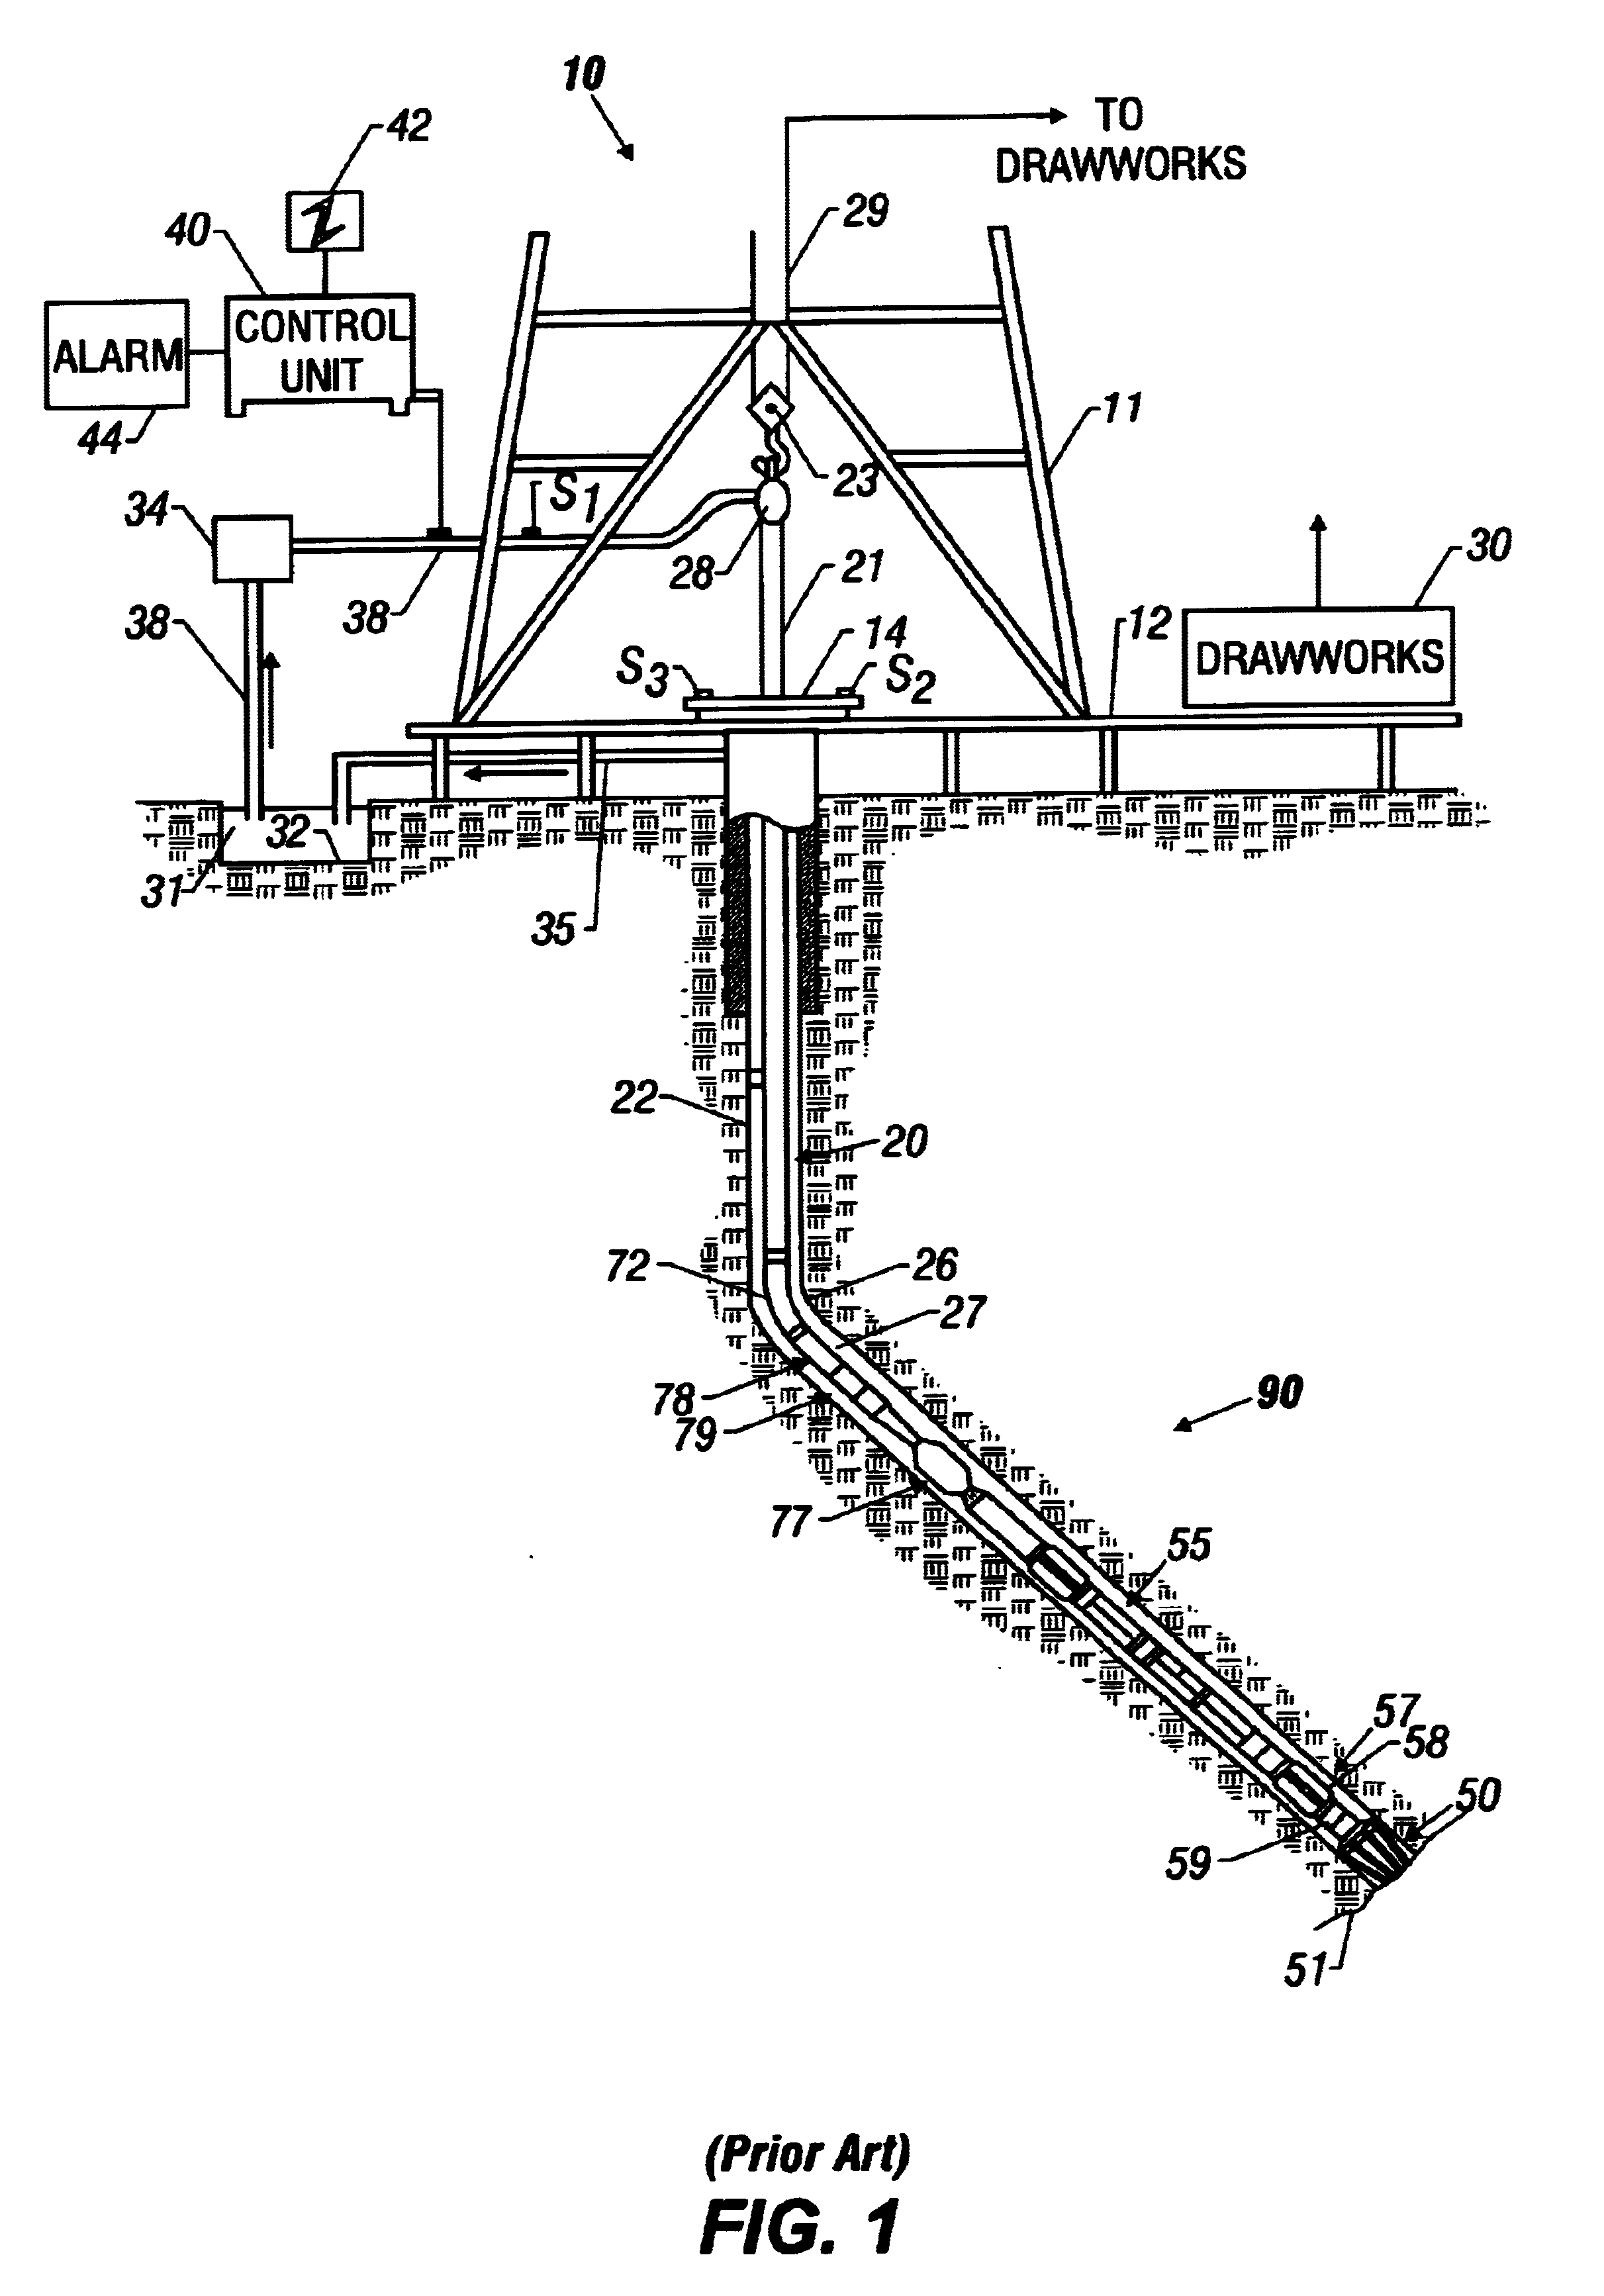 Slotted NMR antenna cover